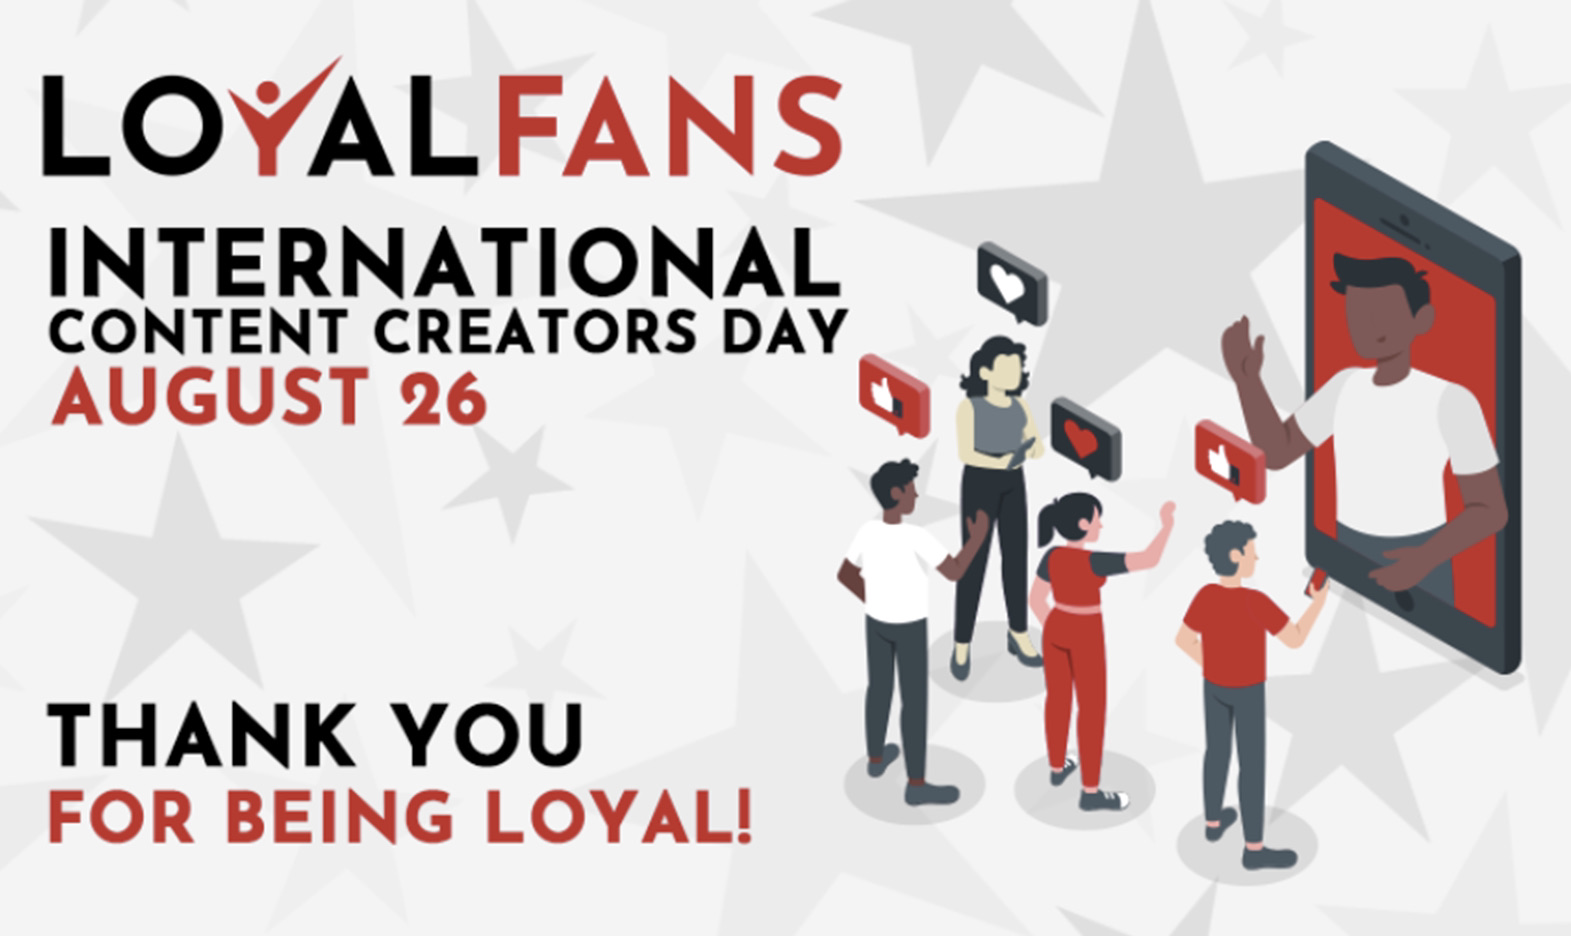 Loyalfans.com is excited to celebrate the second annual International Conte...